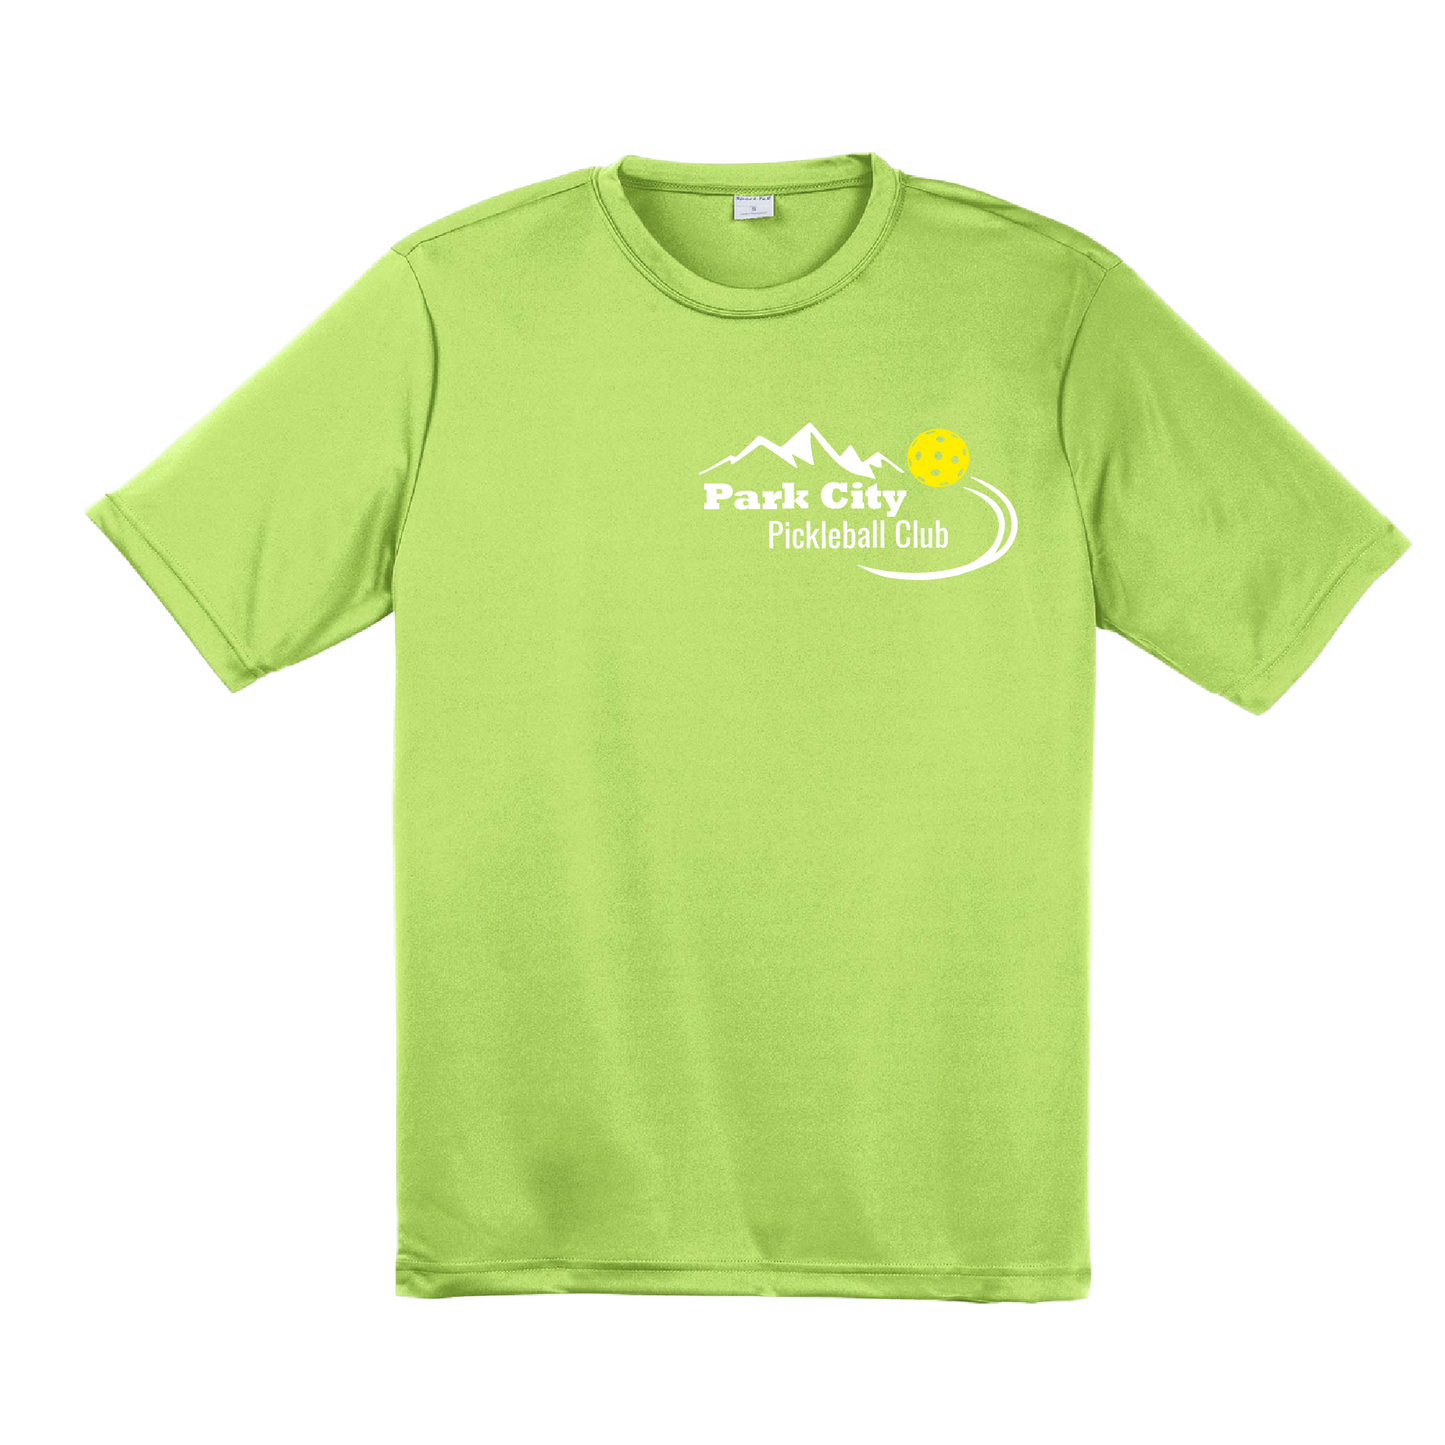 Pickleball Design: Park City Pickleball Club (white words)  Men's Style: Short Sleeved   Shirts are lightweight, roomy and highly breathable. These moisture-wicking shirts are designed for athletic performance. They feature PosiCharge technology to lock in color and prevent logos from fading. Removable tag and set-in sleeves for comfort.